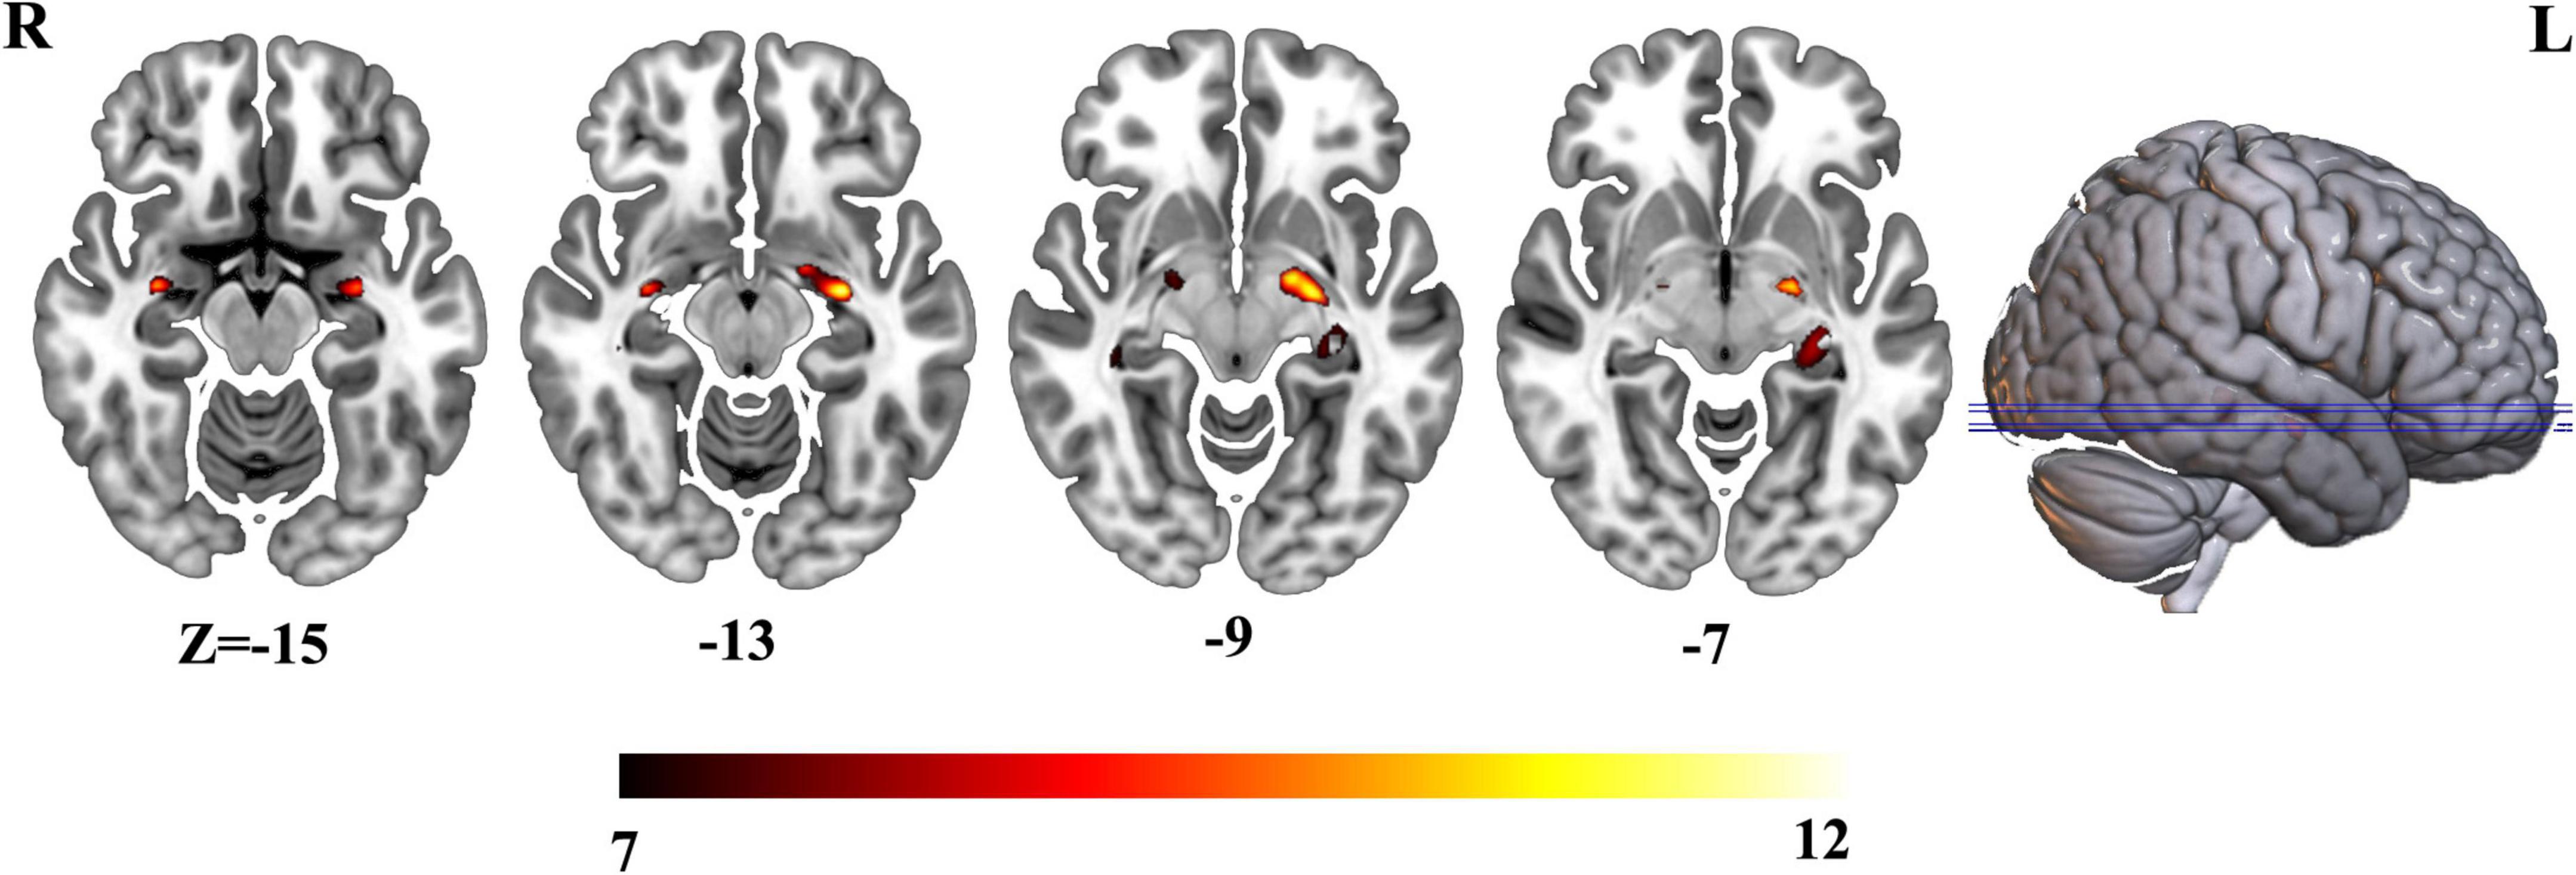 Frontiers Hippocampal morphological atrophy and distinct patterns of structural covariance network in Alzheimers disease and mild cognitive impairment